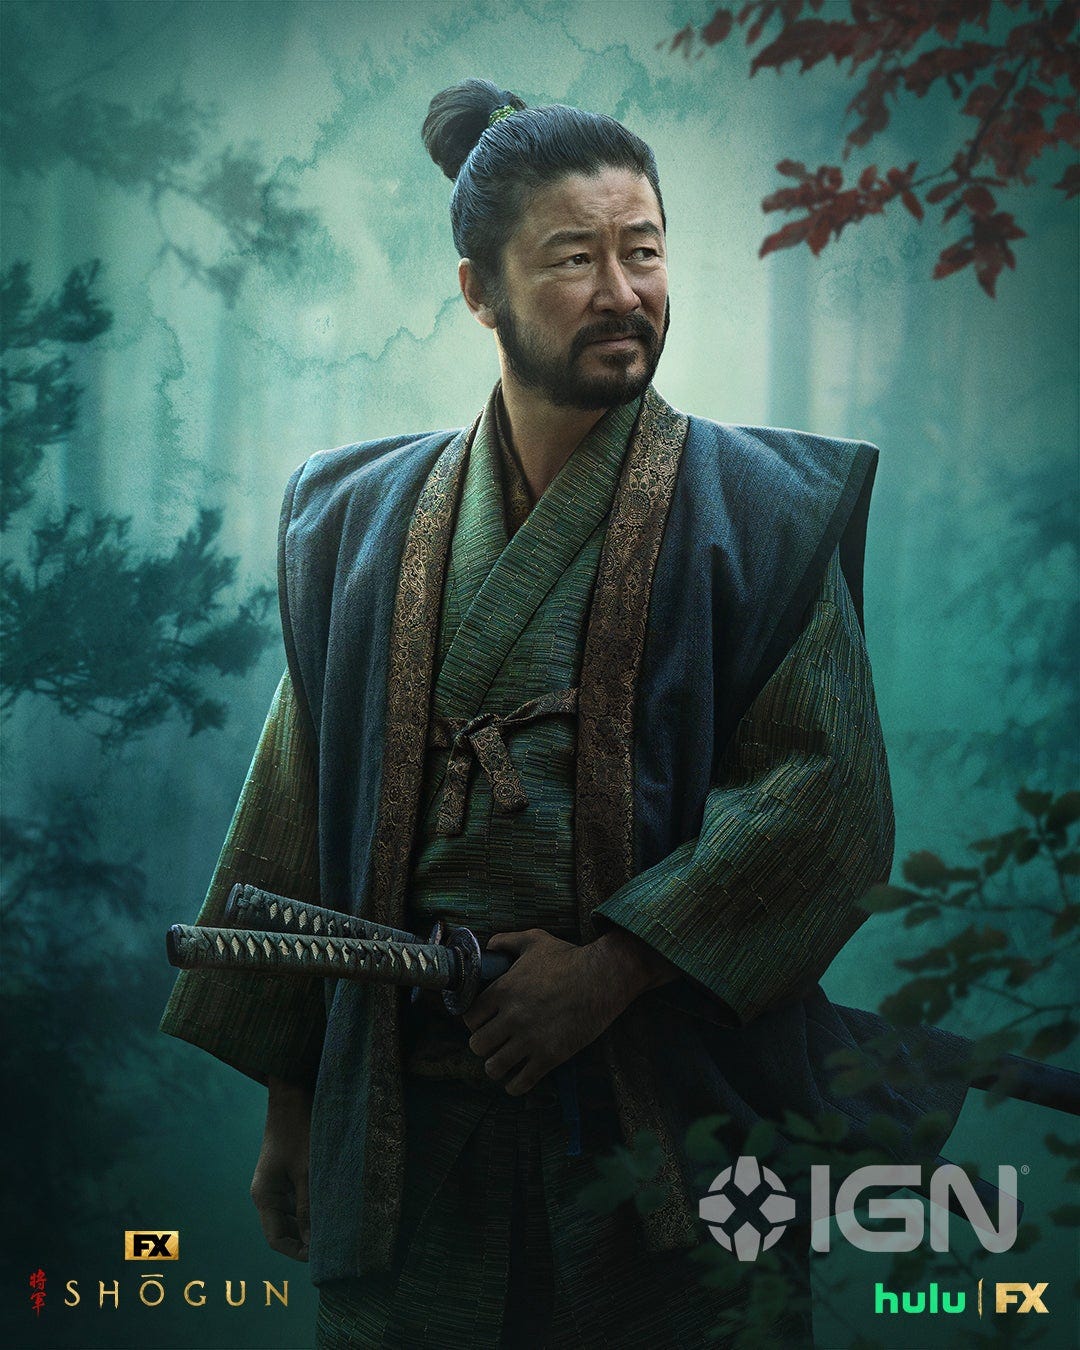 Shogun: 14 Exclusive Character Posters from FX's Epic New Series - IGN